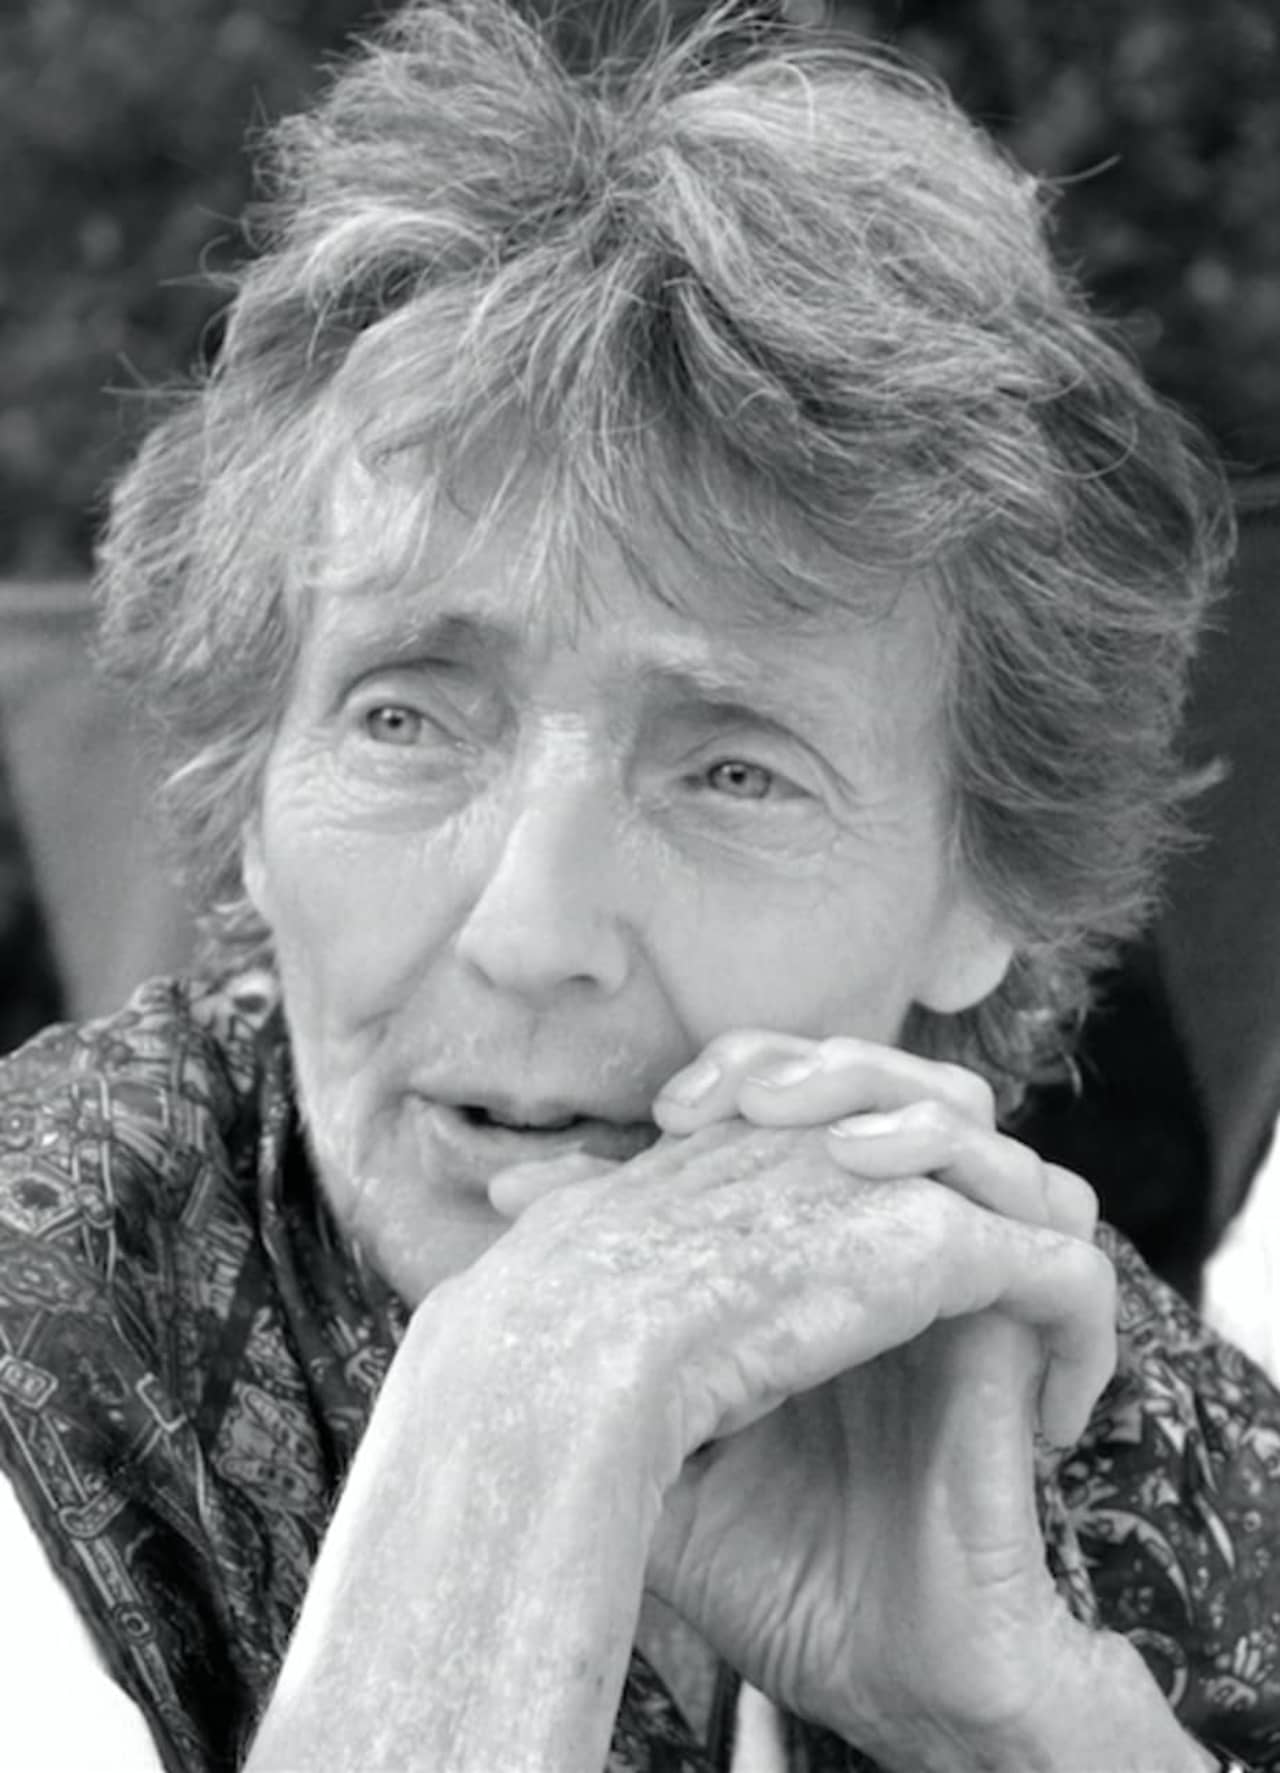 Award-winning poet Fanny Howe comes to Grace Farms for a film screening and Q&A on Oct. 17.